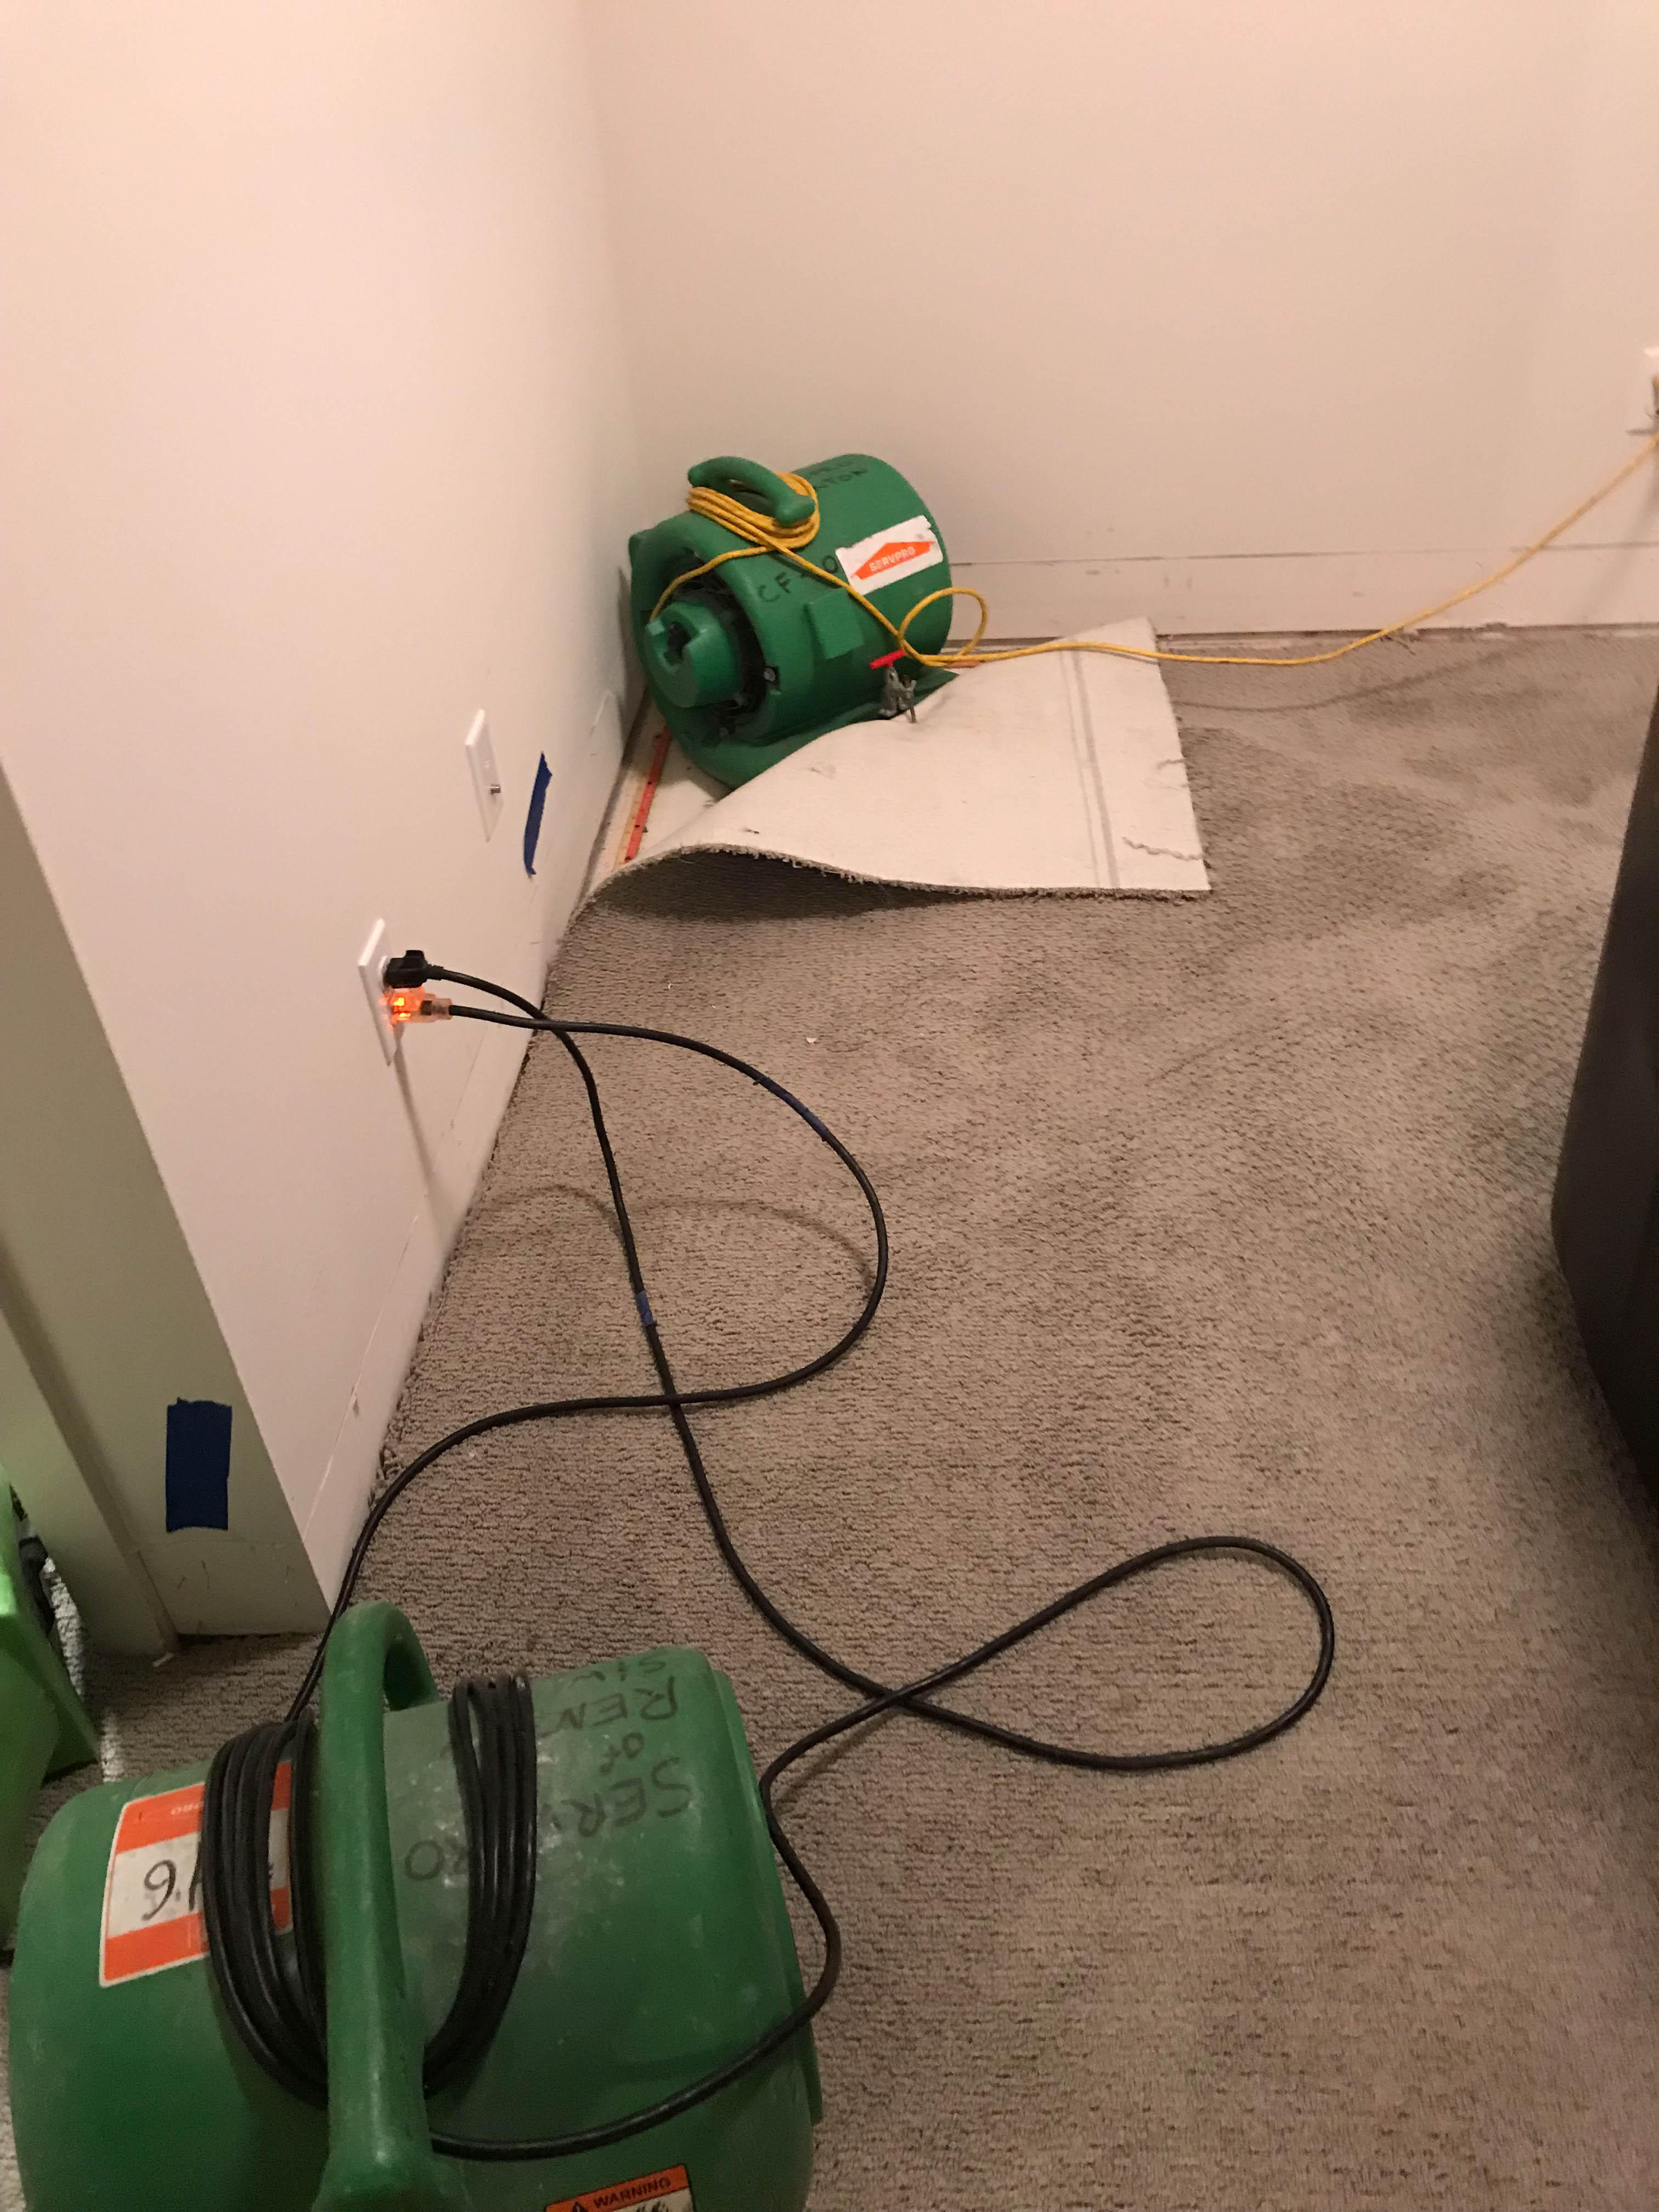 Sometimes, carpets have to be replaced after water damage, but they can often be salvaged using directed heat drying. SERVPRO is equipped to handle any water damage need!